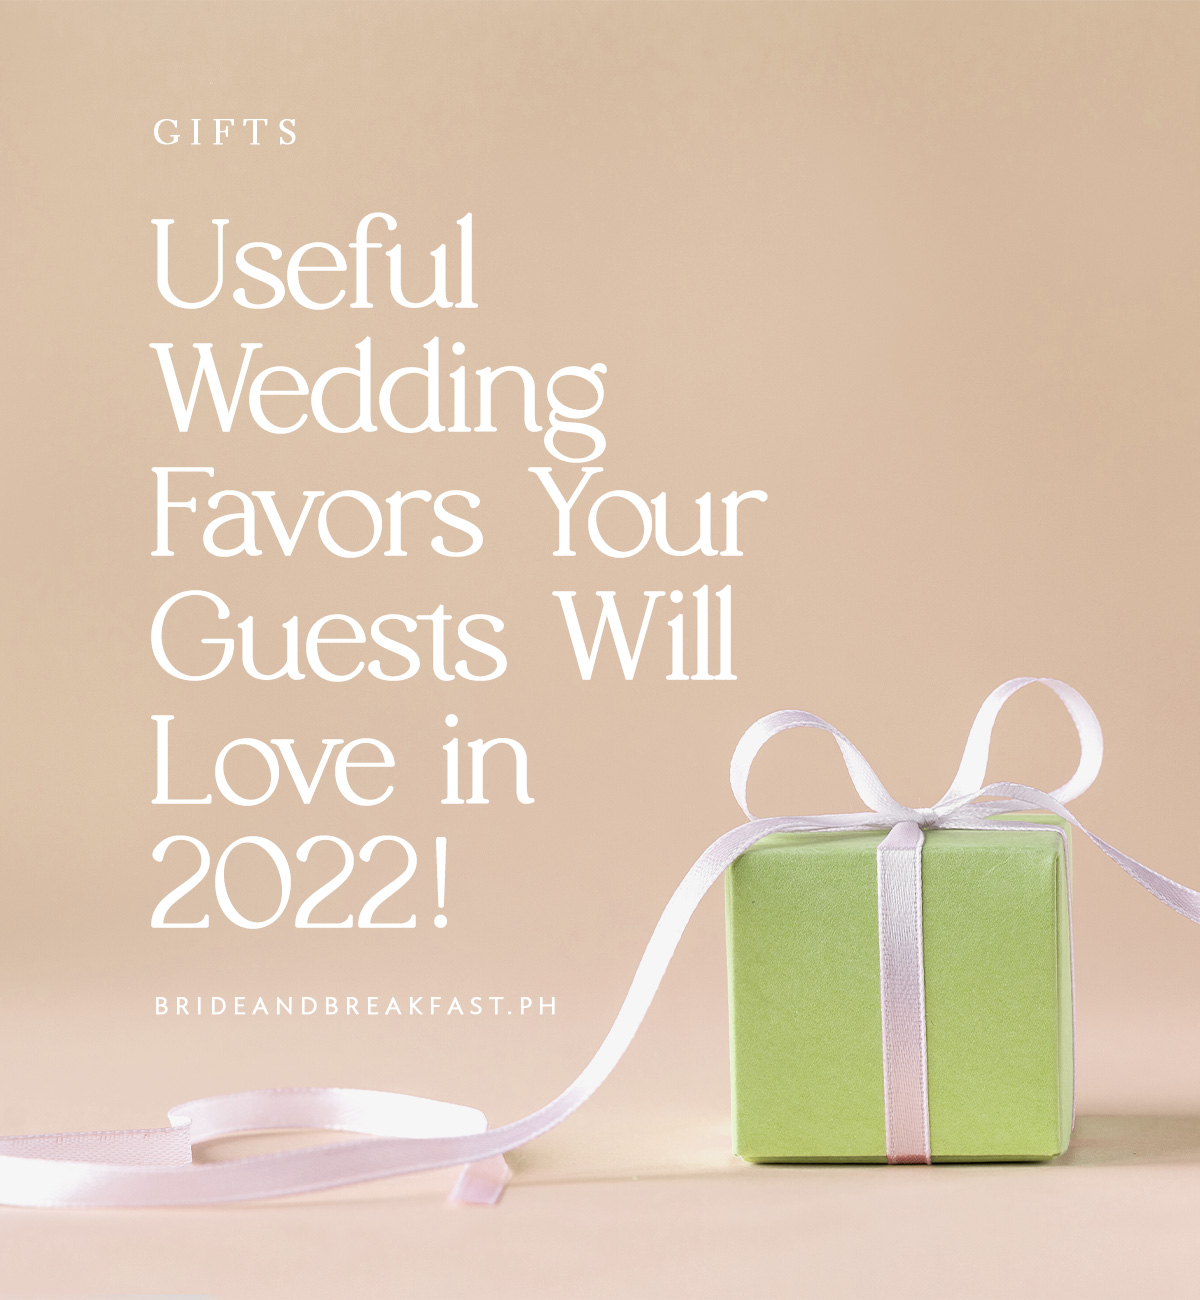 Useful Wedding Favors Your Guests Will Love in 2022!